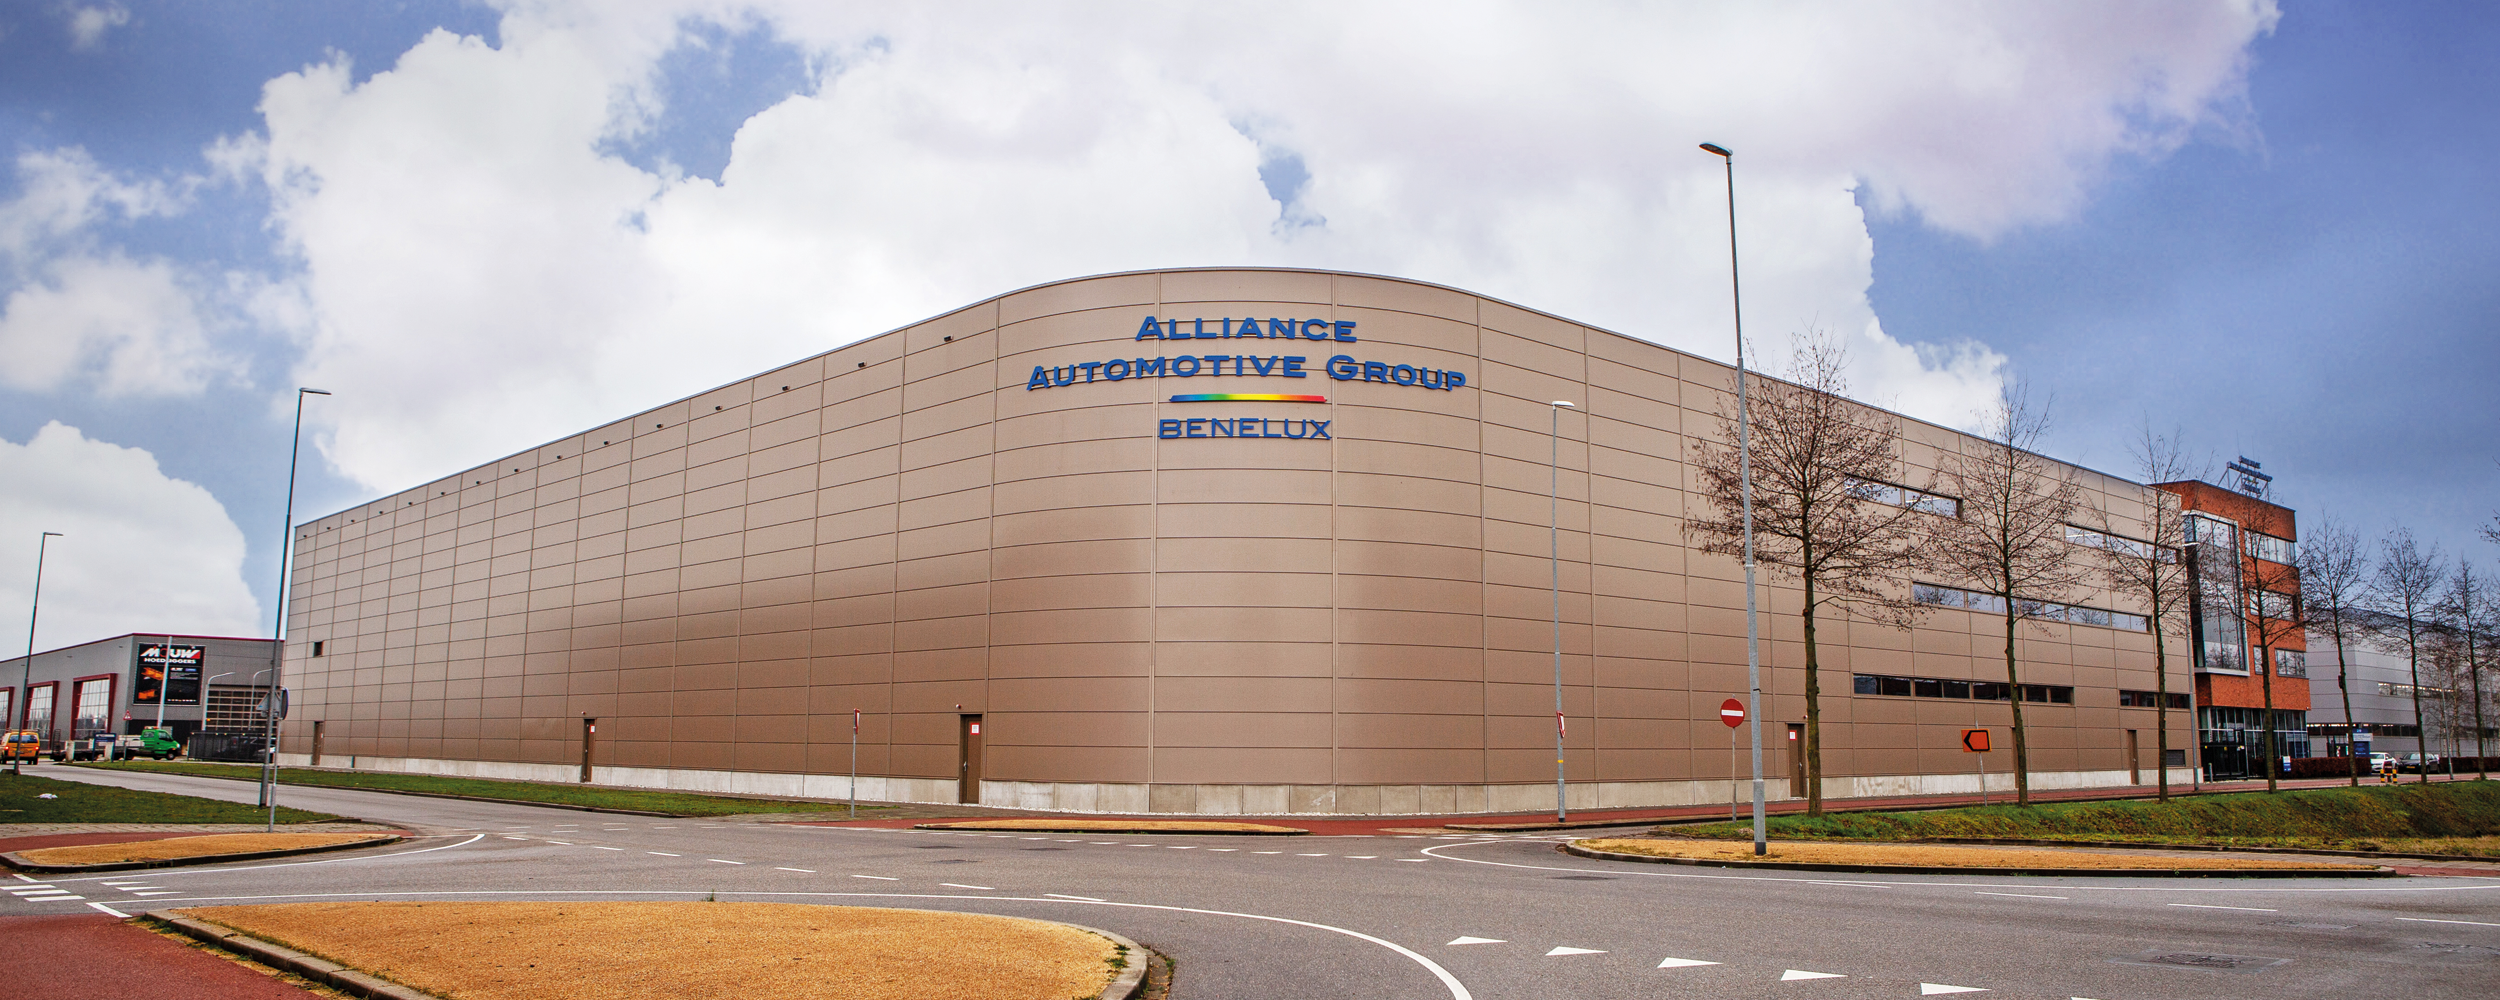 Picture-Building-Alliance Automotive-Group-AAGB-Benelux-Pand